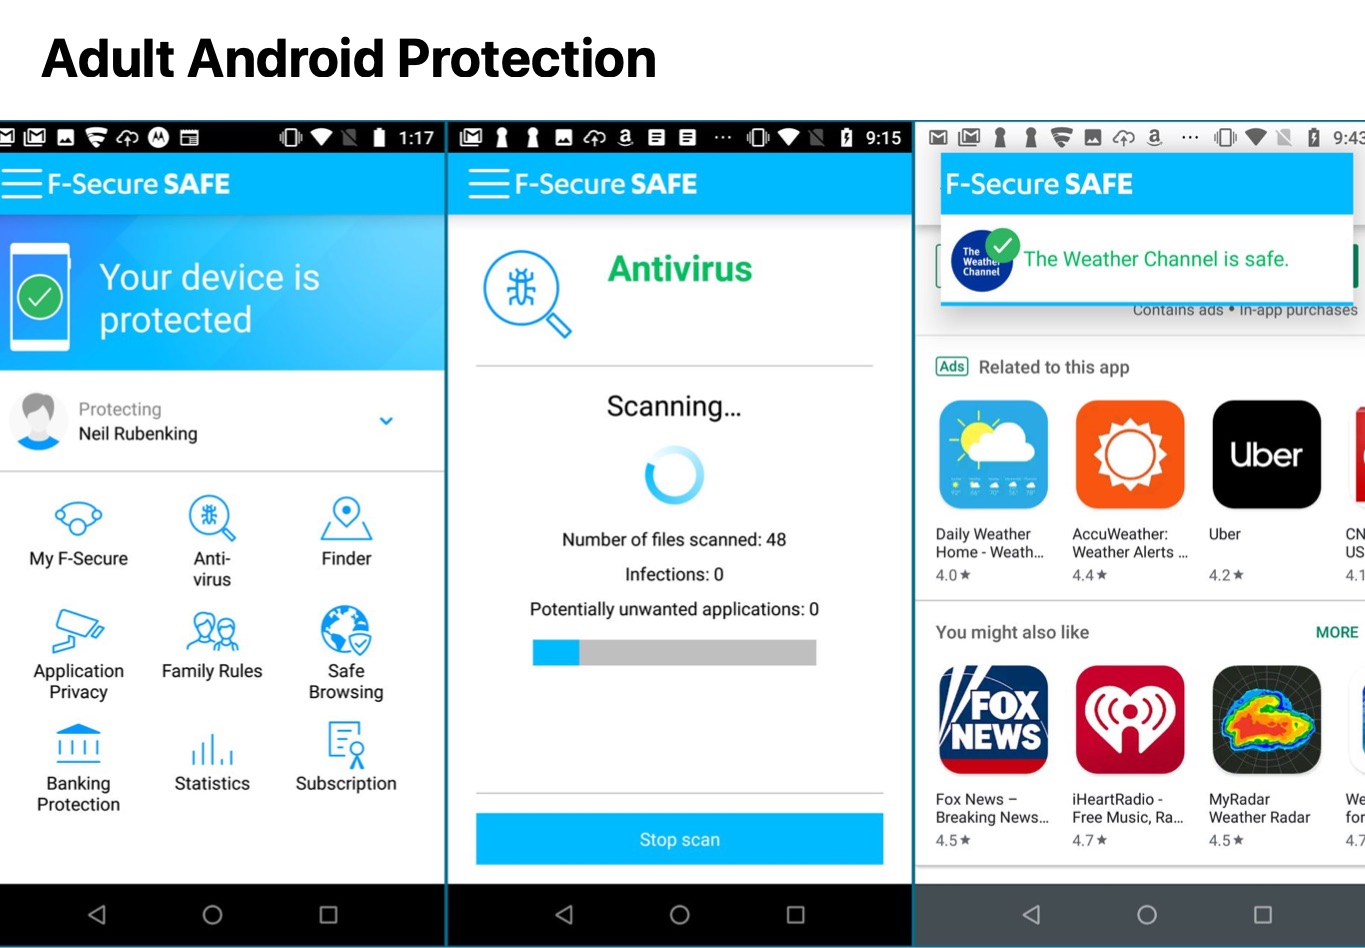 F Secure sage keeps kids safe on Android, kids safe search on mobile, android kids online protection